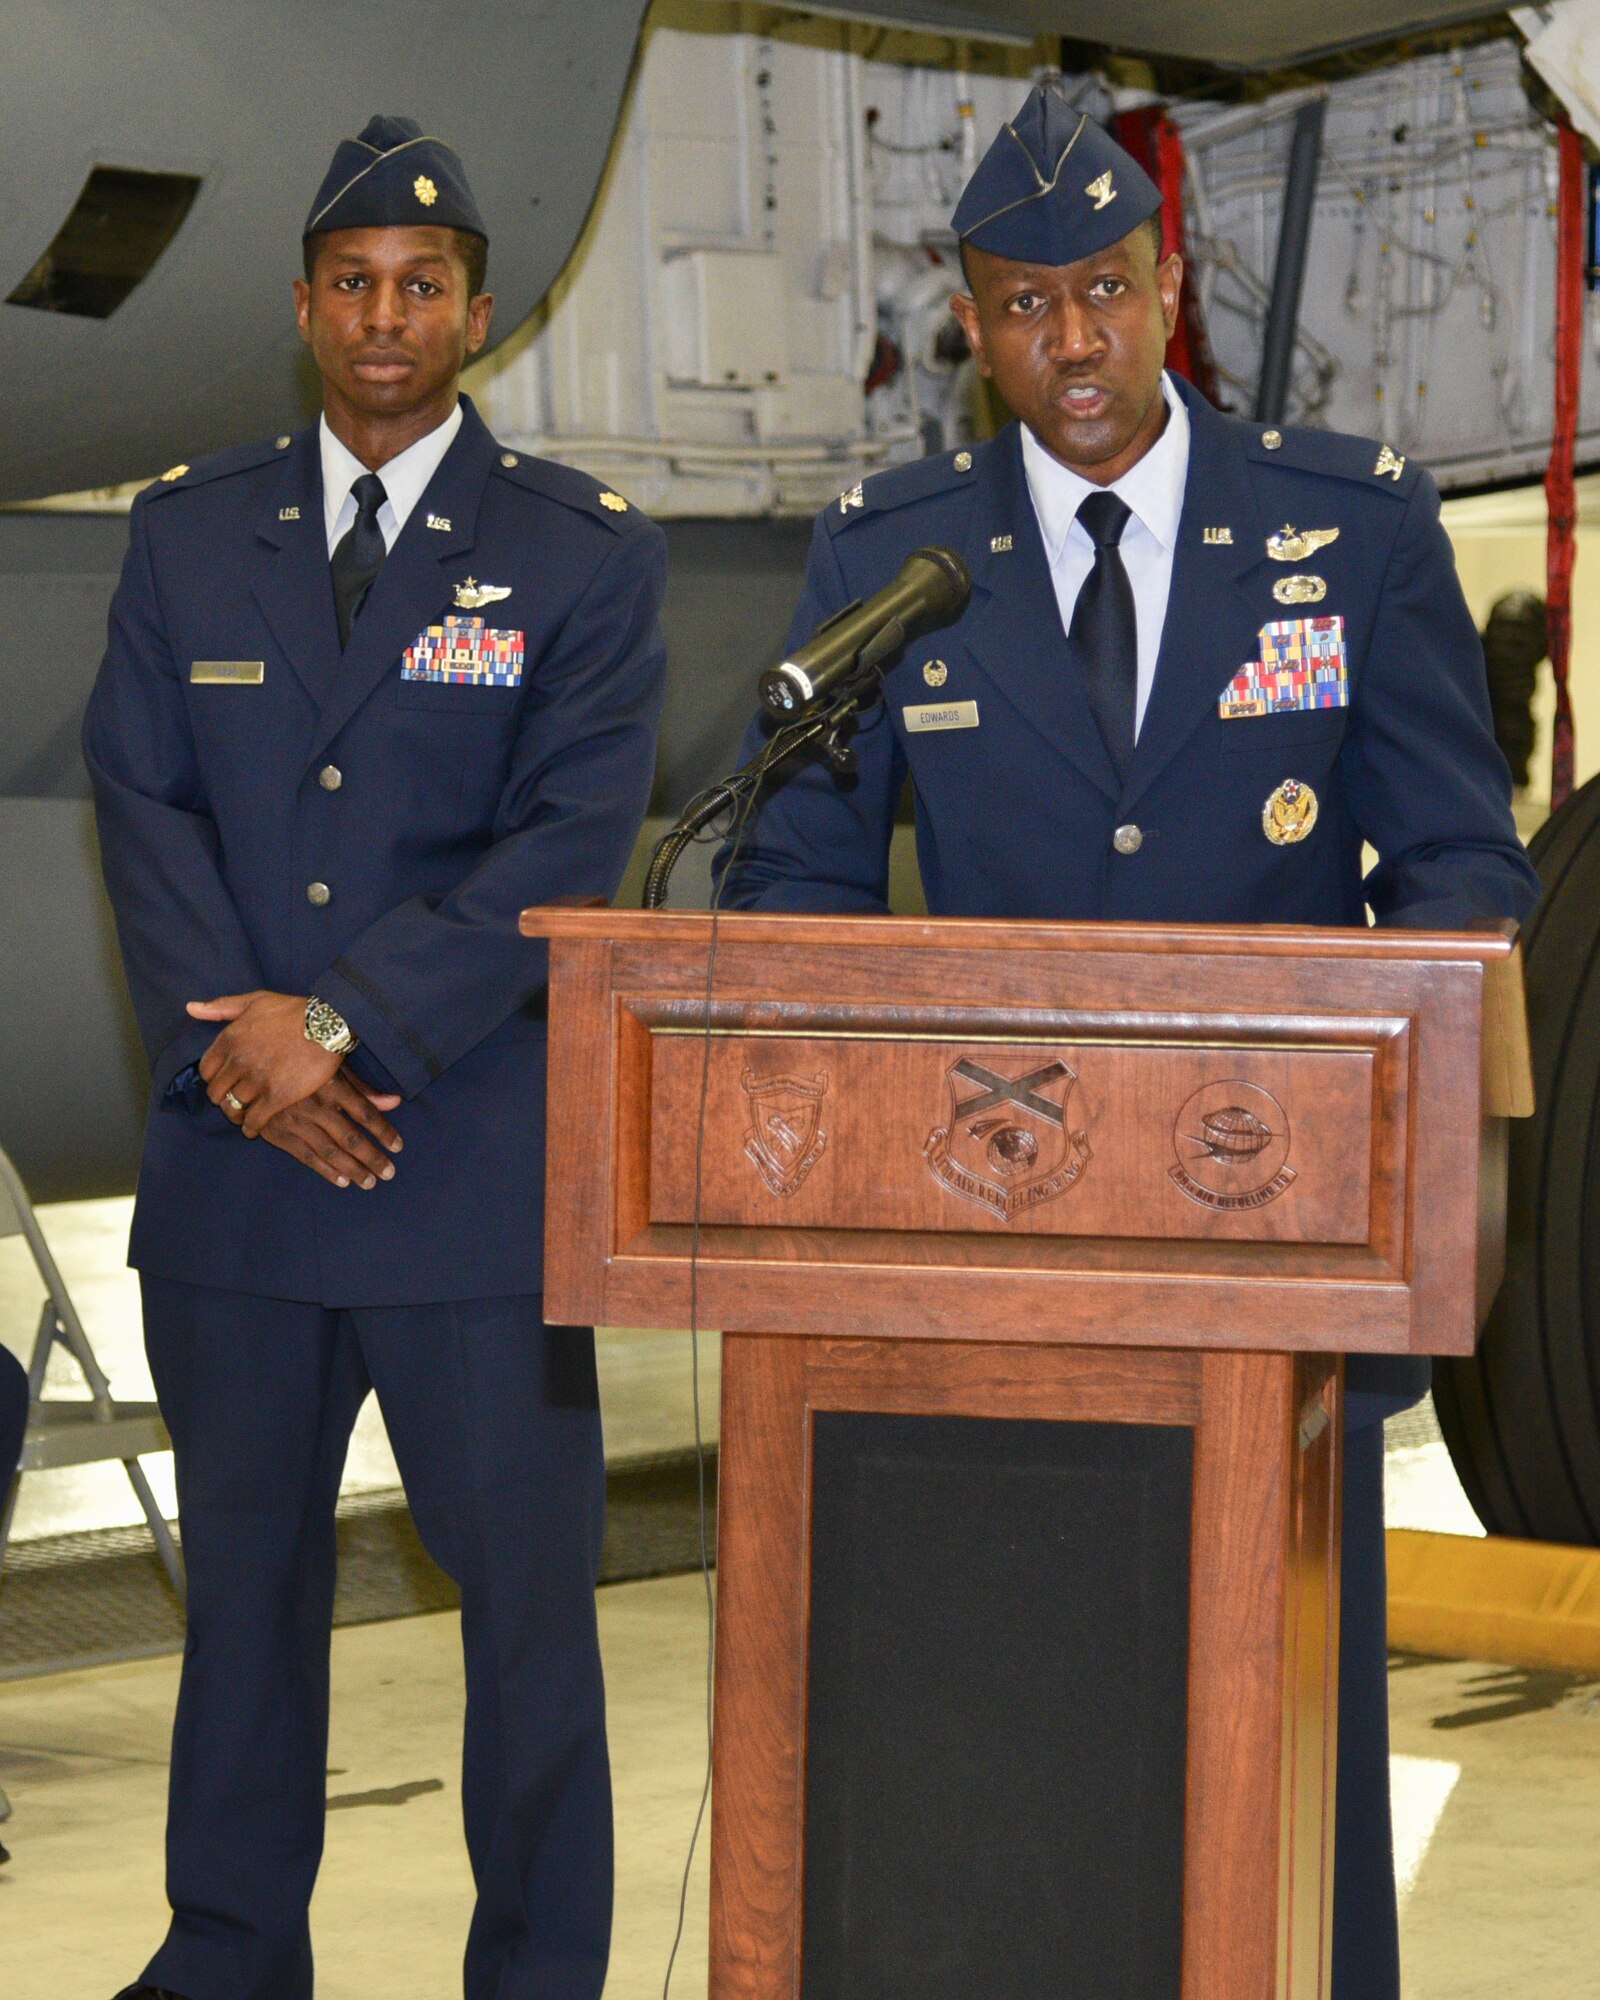 Col. Edwards Addresses Guest During Change of Command Ceremony